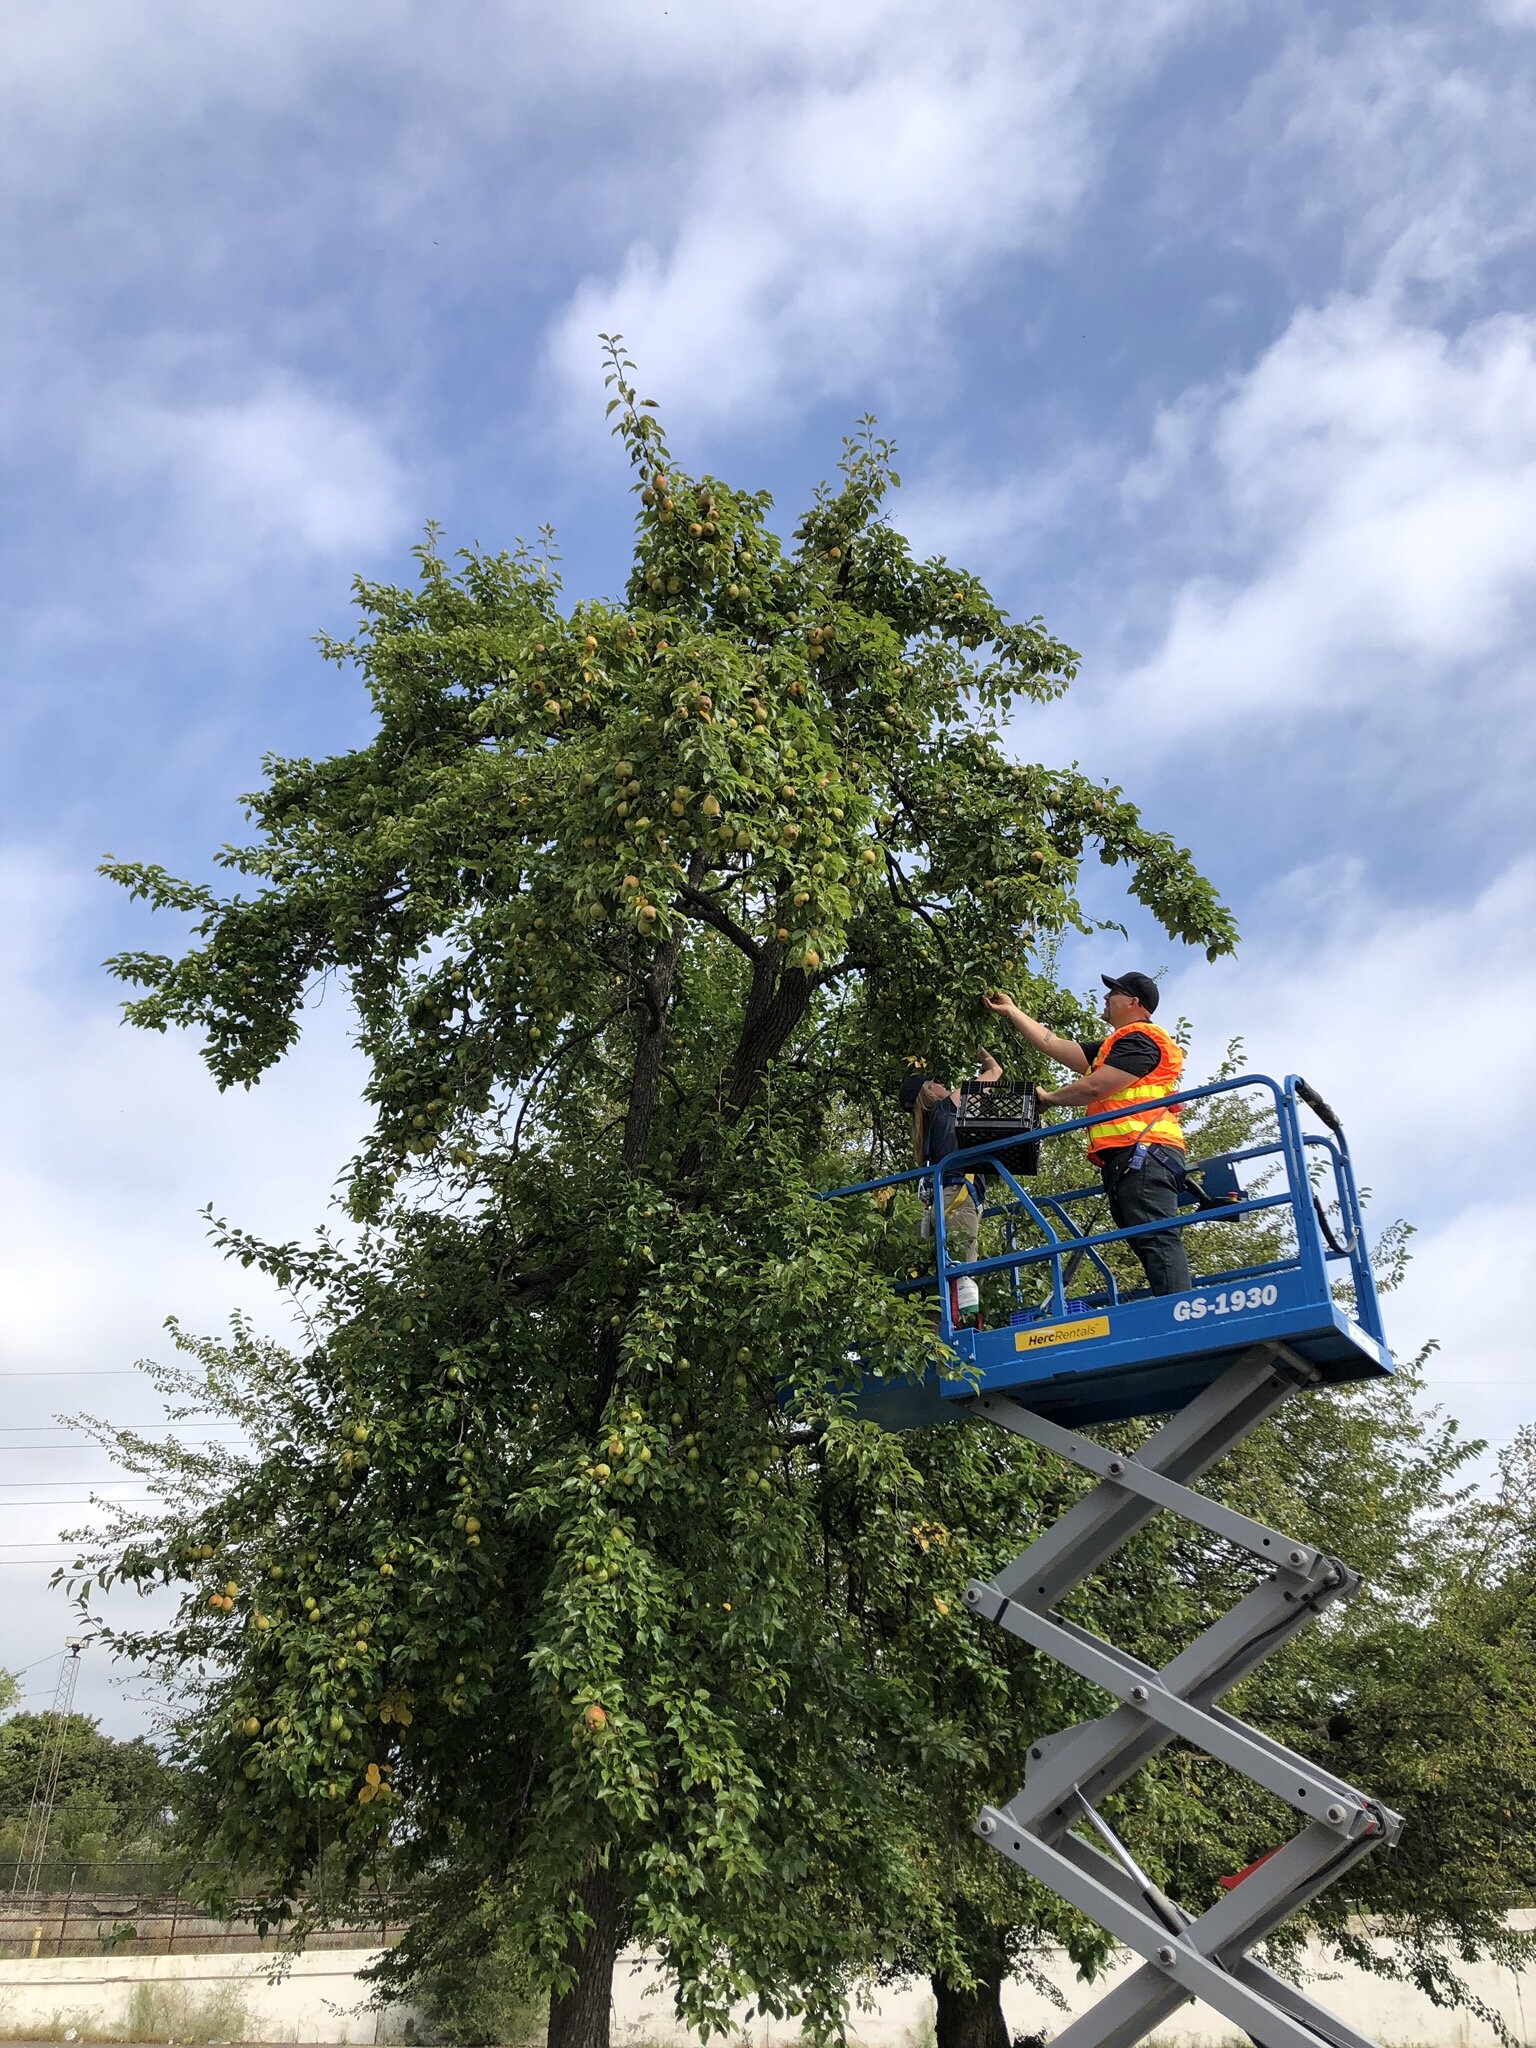 Herc Rentals donated equipment to help volunteers harvest the pear tree at Electric Works.